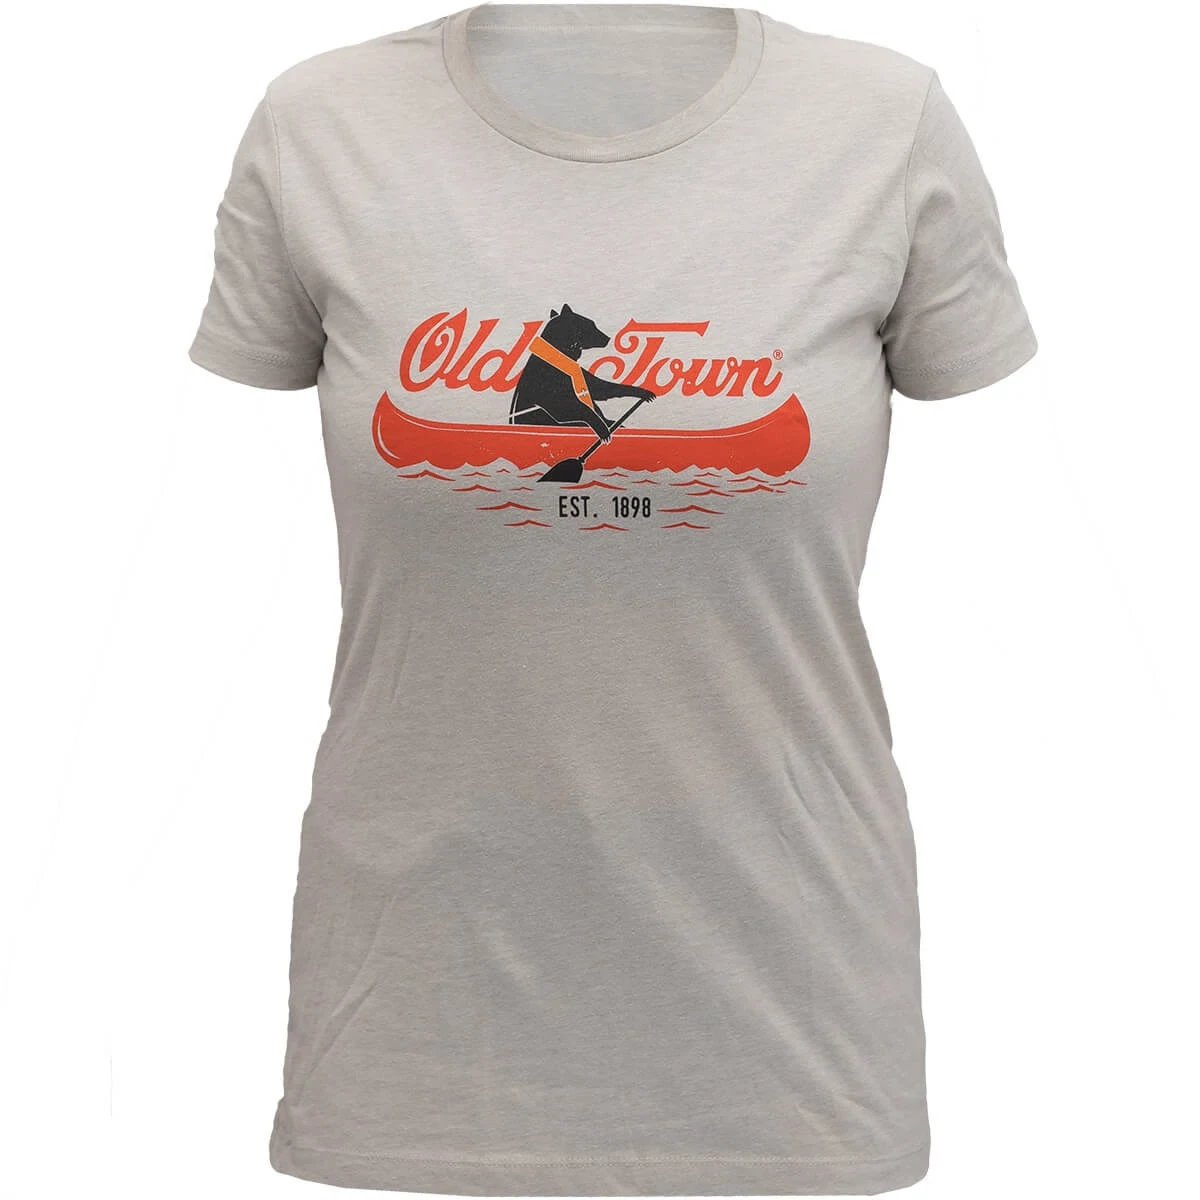 Old Town Bear T-Shirt - Women's - Front View